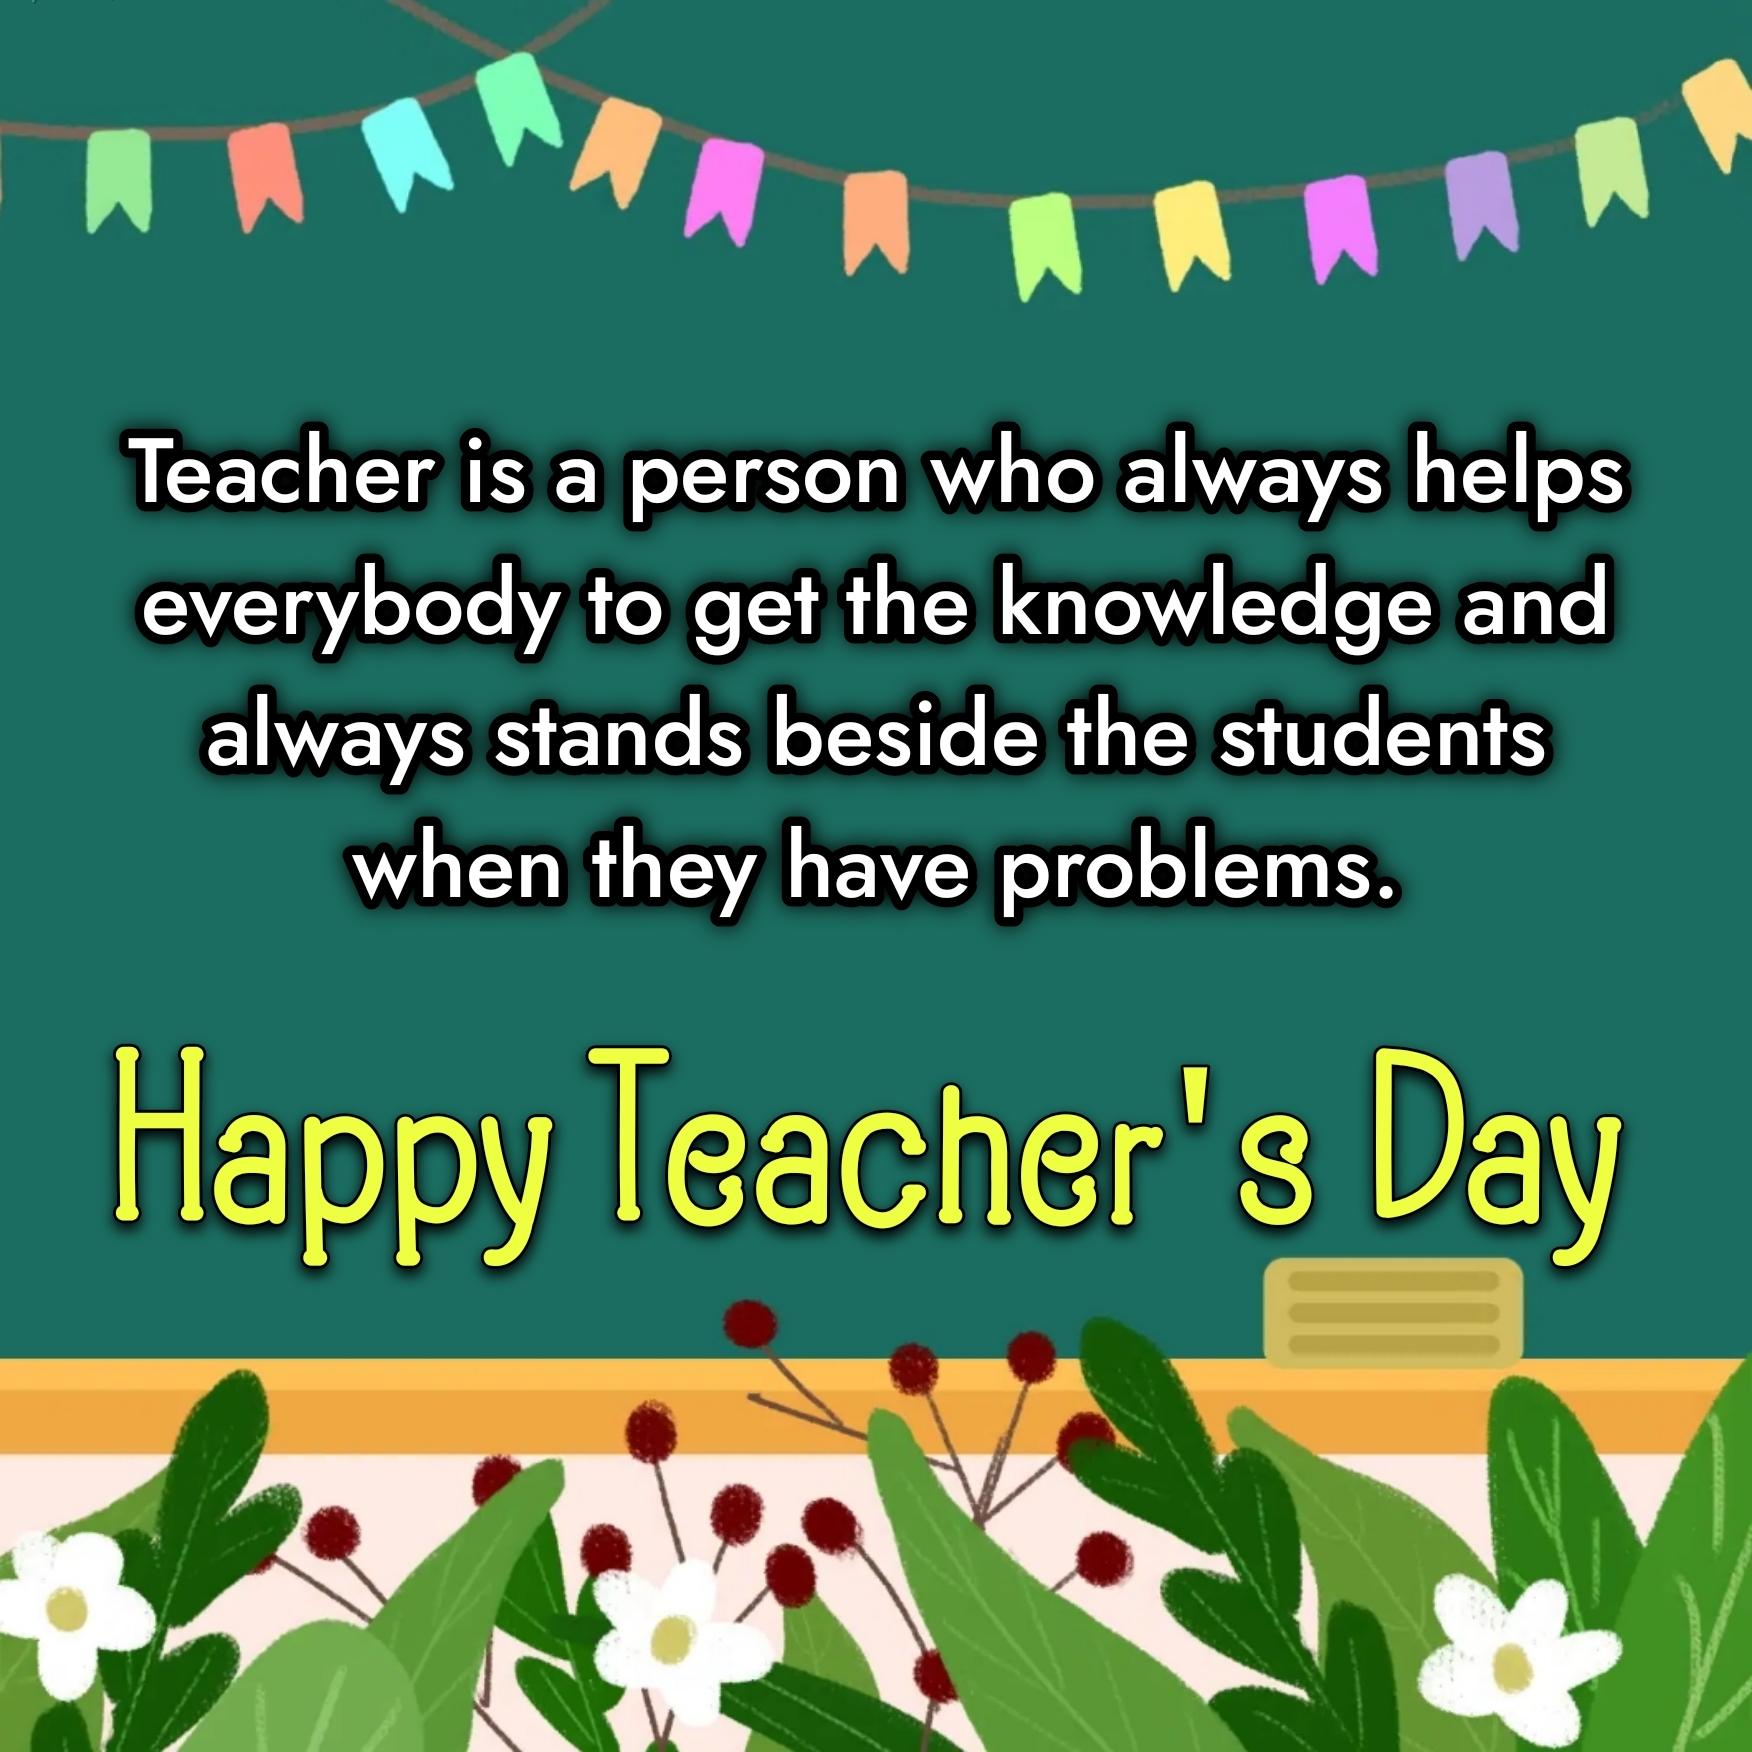 Teacher is a person who always helps everybody